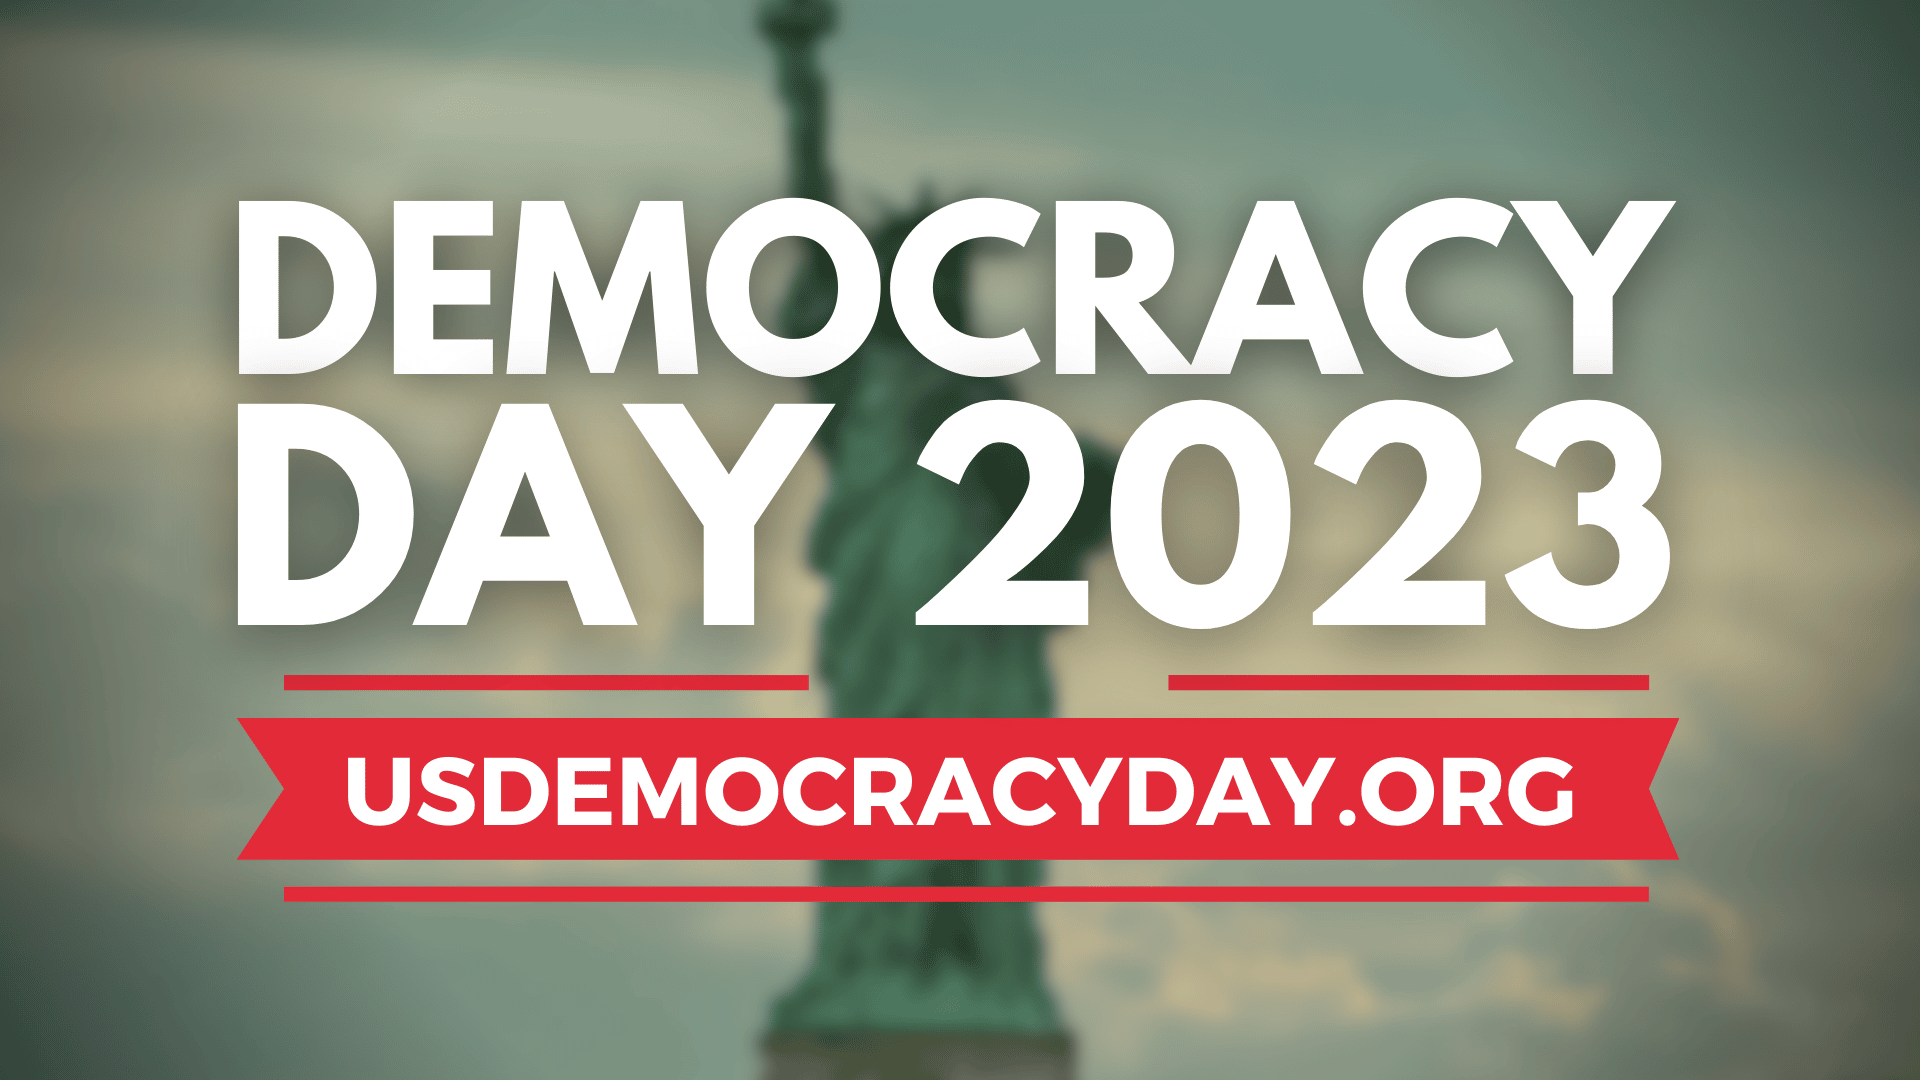 DECORATION ONLY: White text against a blurred background image of the Statue of Liberty. The text reads, "DEMOCRACY DAY 2023: Sept. 15, 2023 | usdemocracyday.org"